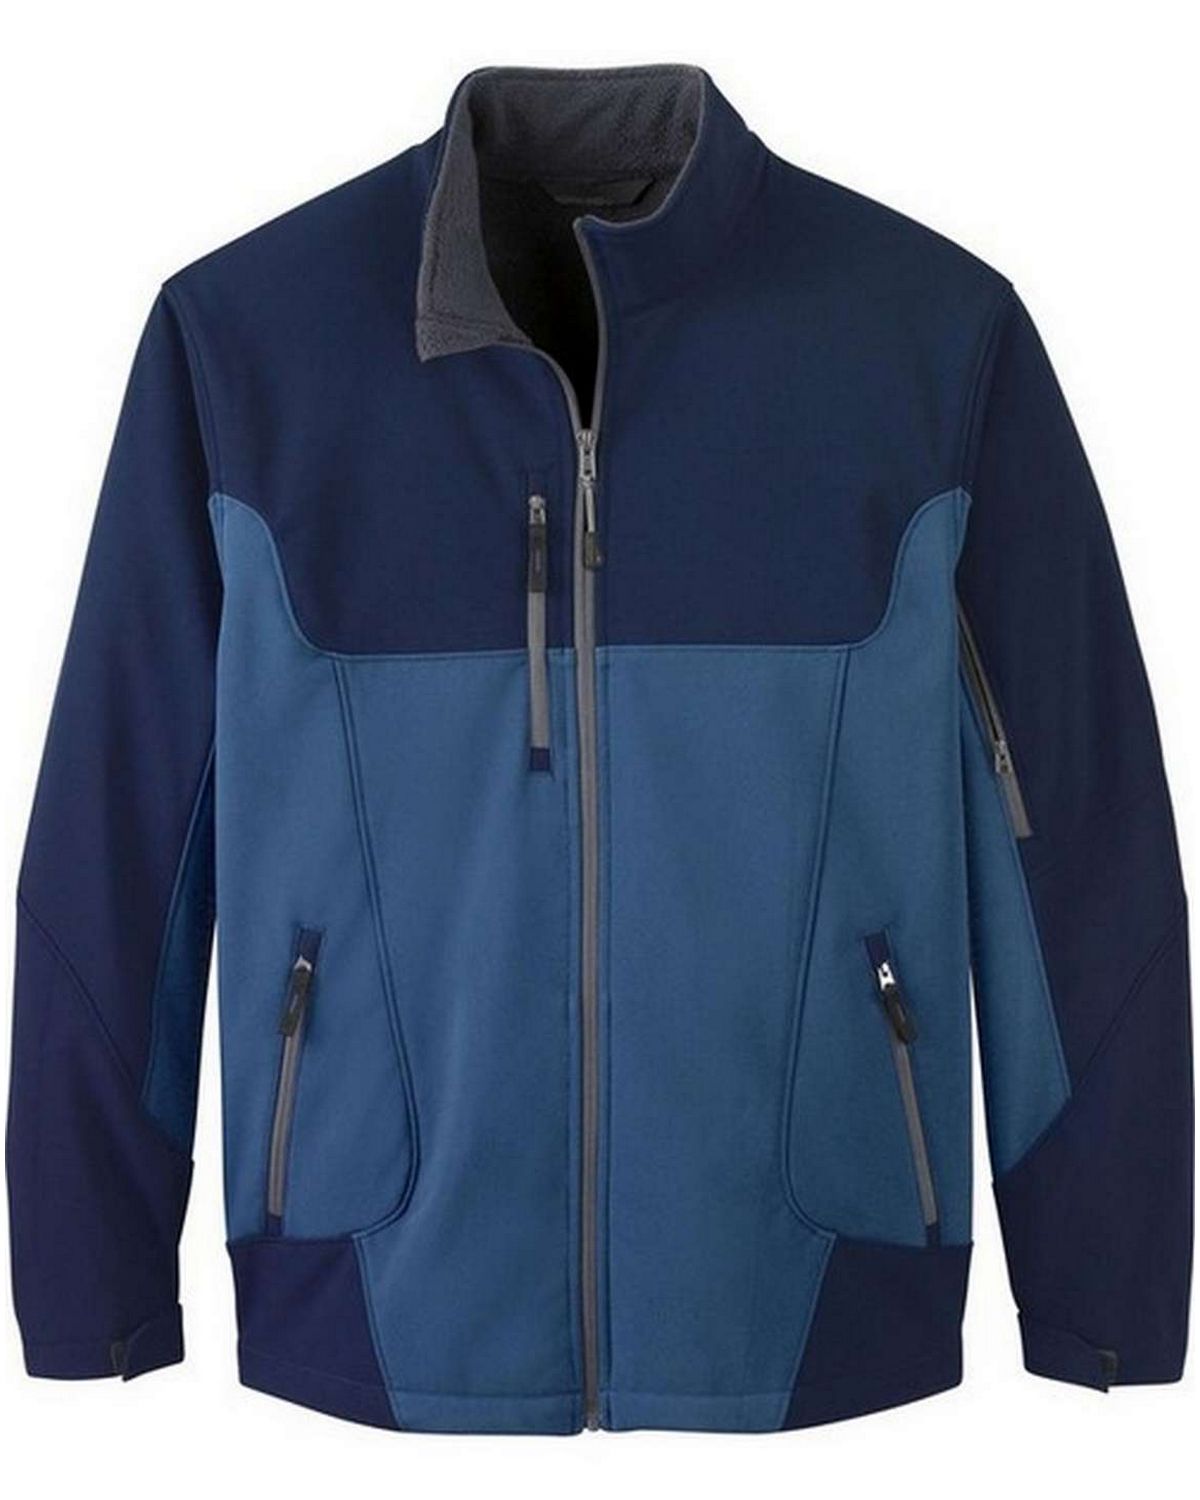 North End 88156 Compass Mens Color-Block Soft Shell Jacket